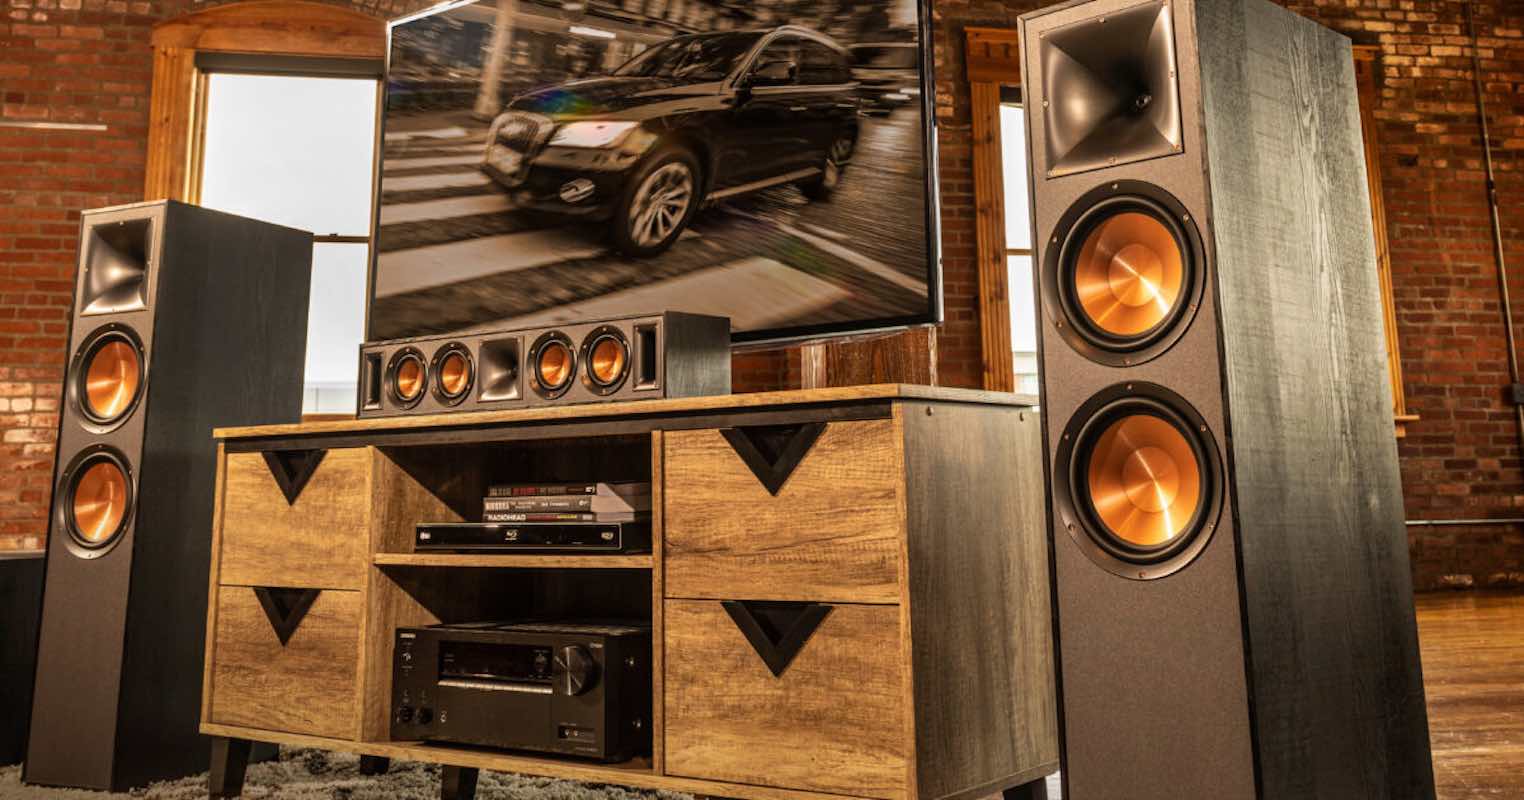 5.1 vs. 7.1 Surround Sound: Which Is Better? - The Home Theater DIY